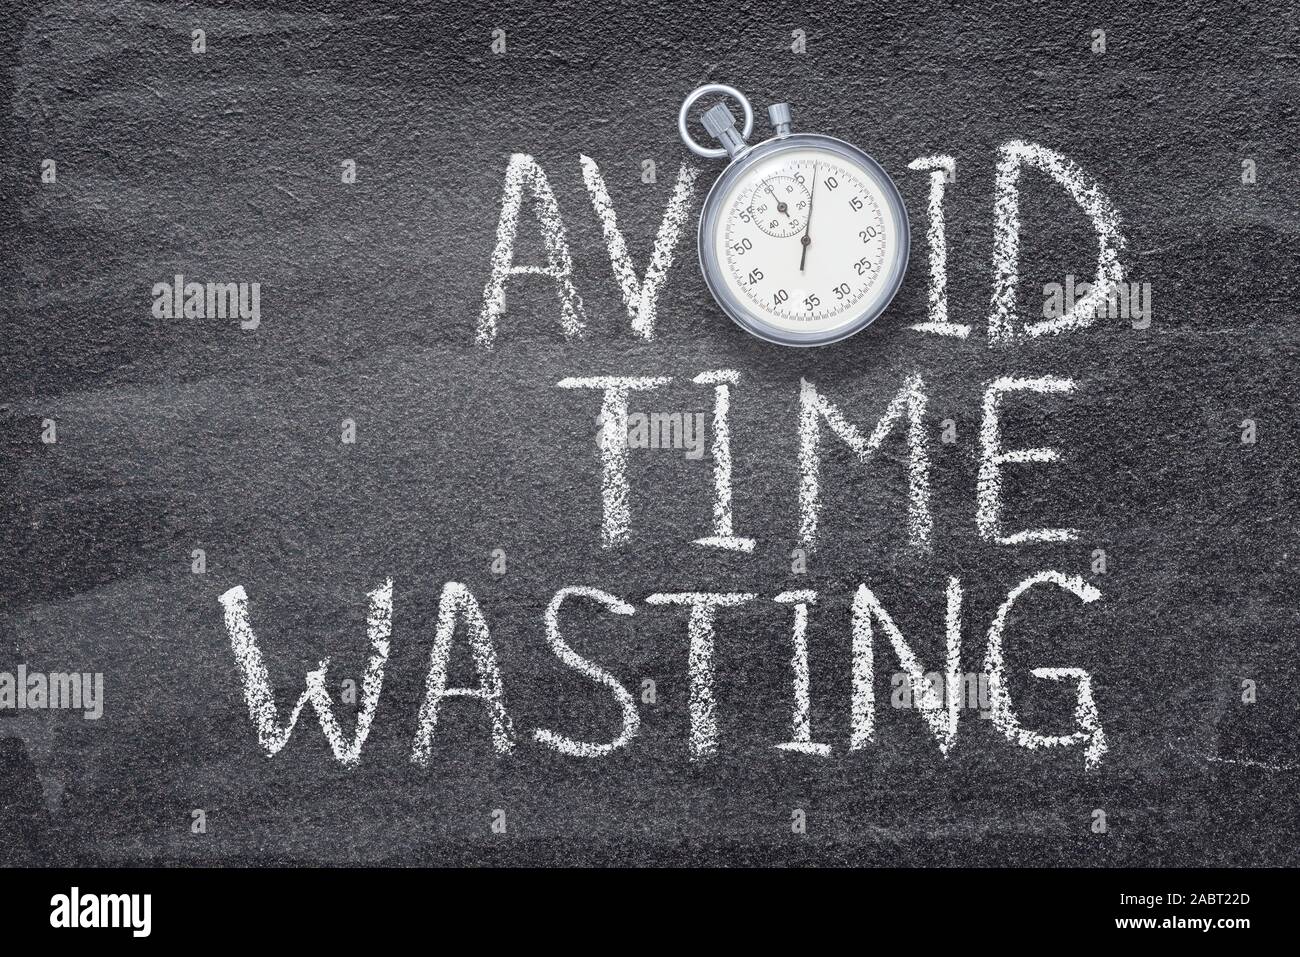 avoid time wasting phrase written on chalkboard with vintage precise stopwatch Stock Photo